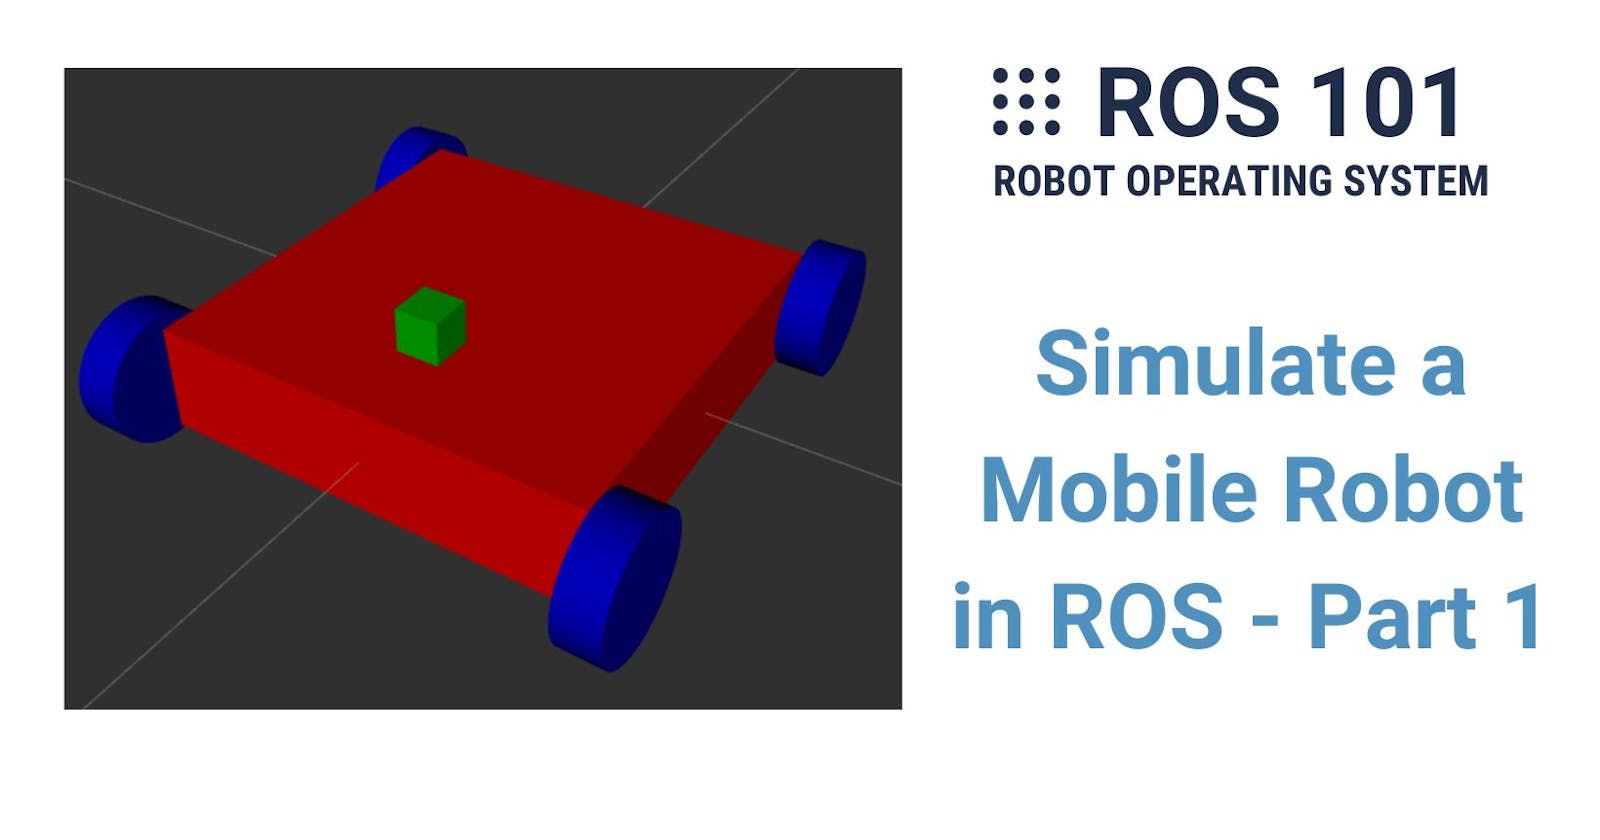 10. Simulate a Mobile Robot in ROS - Part 1